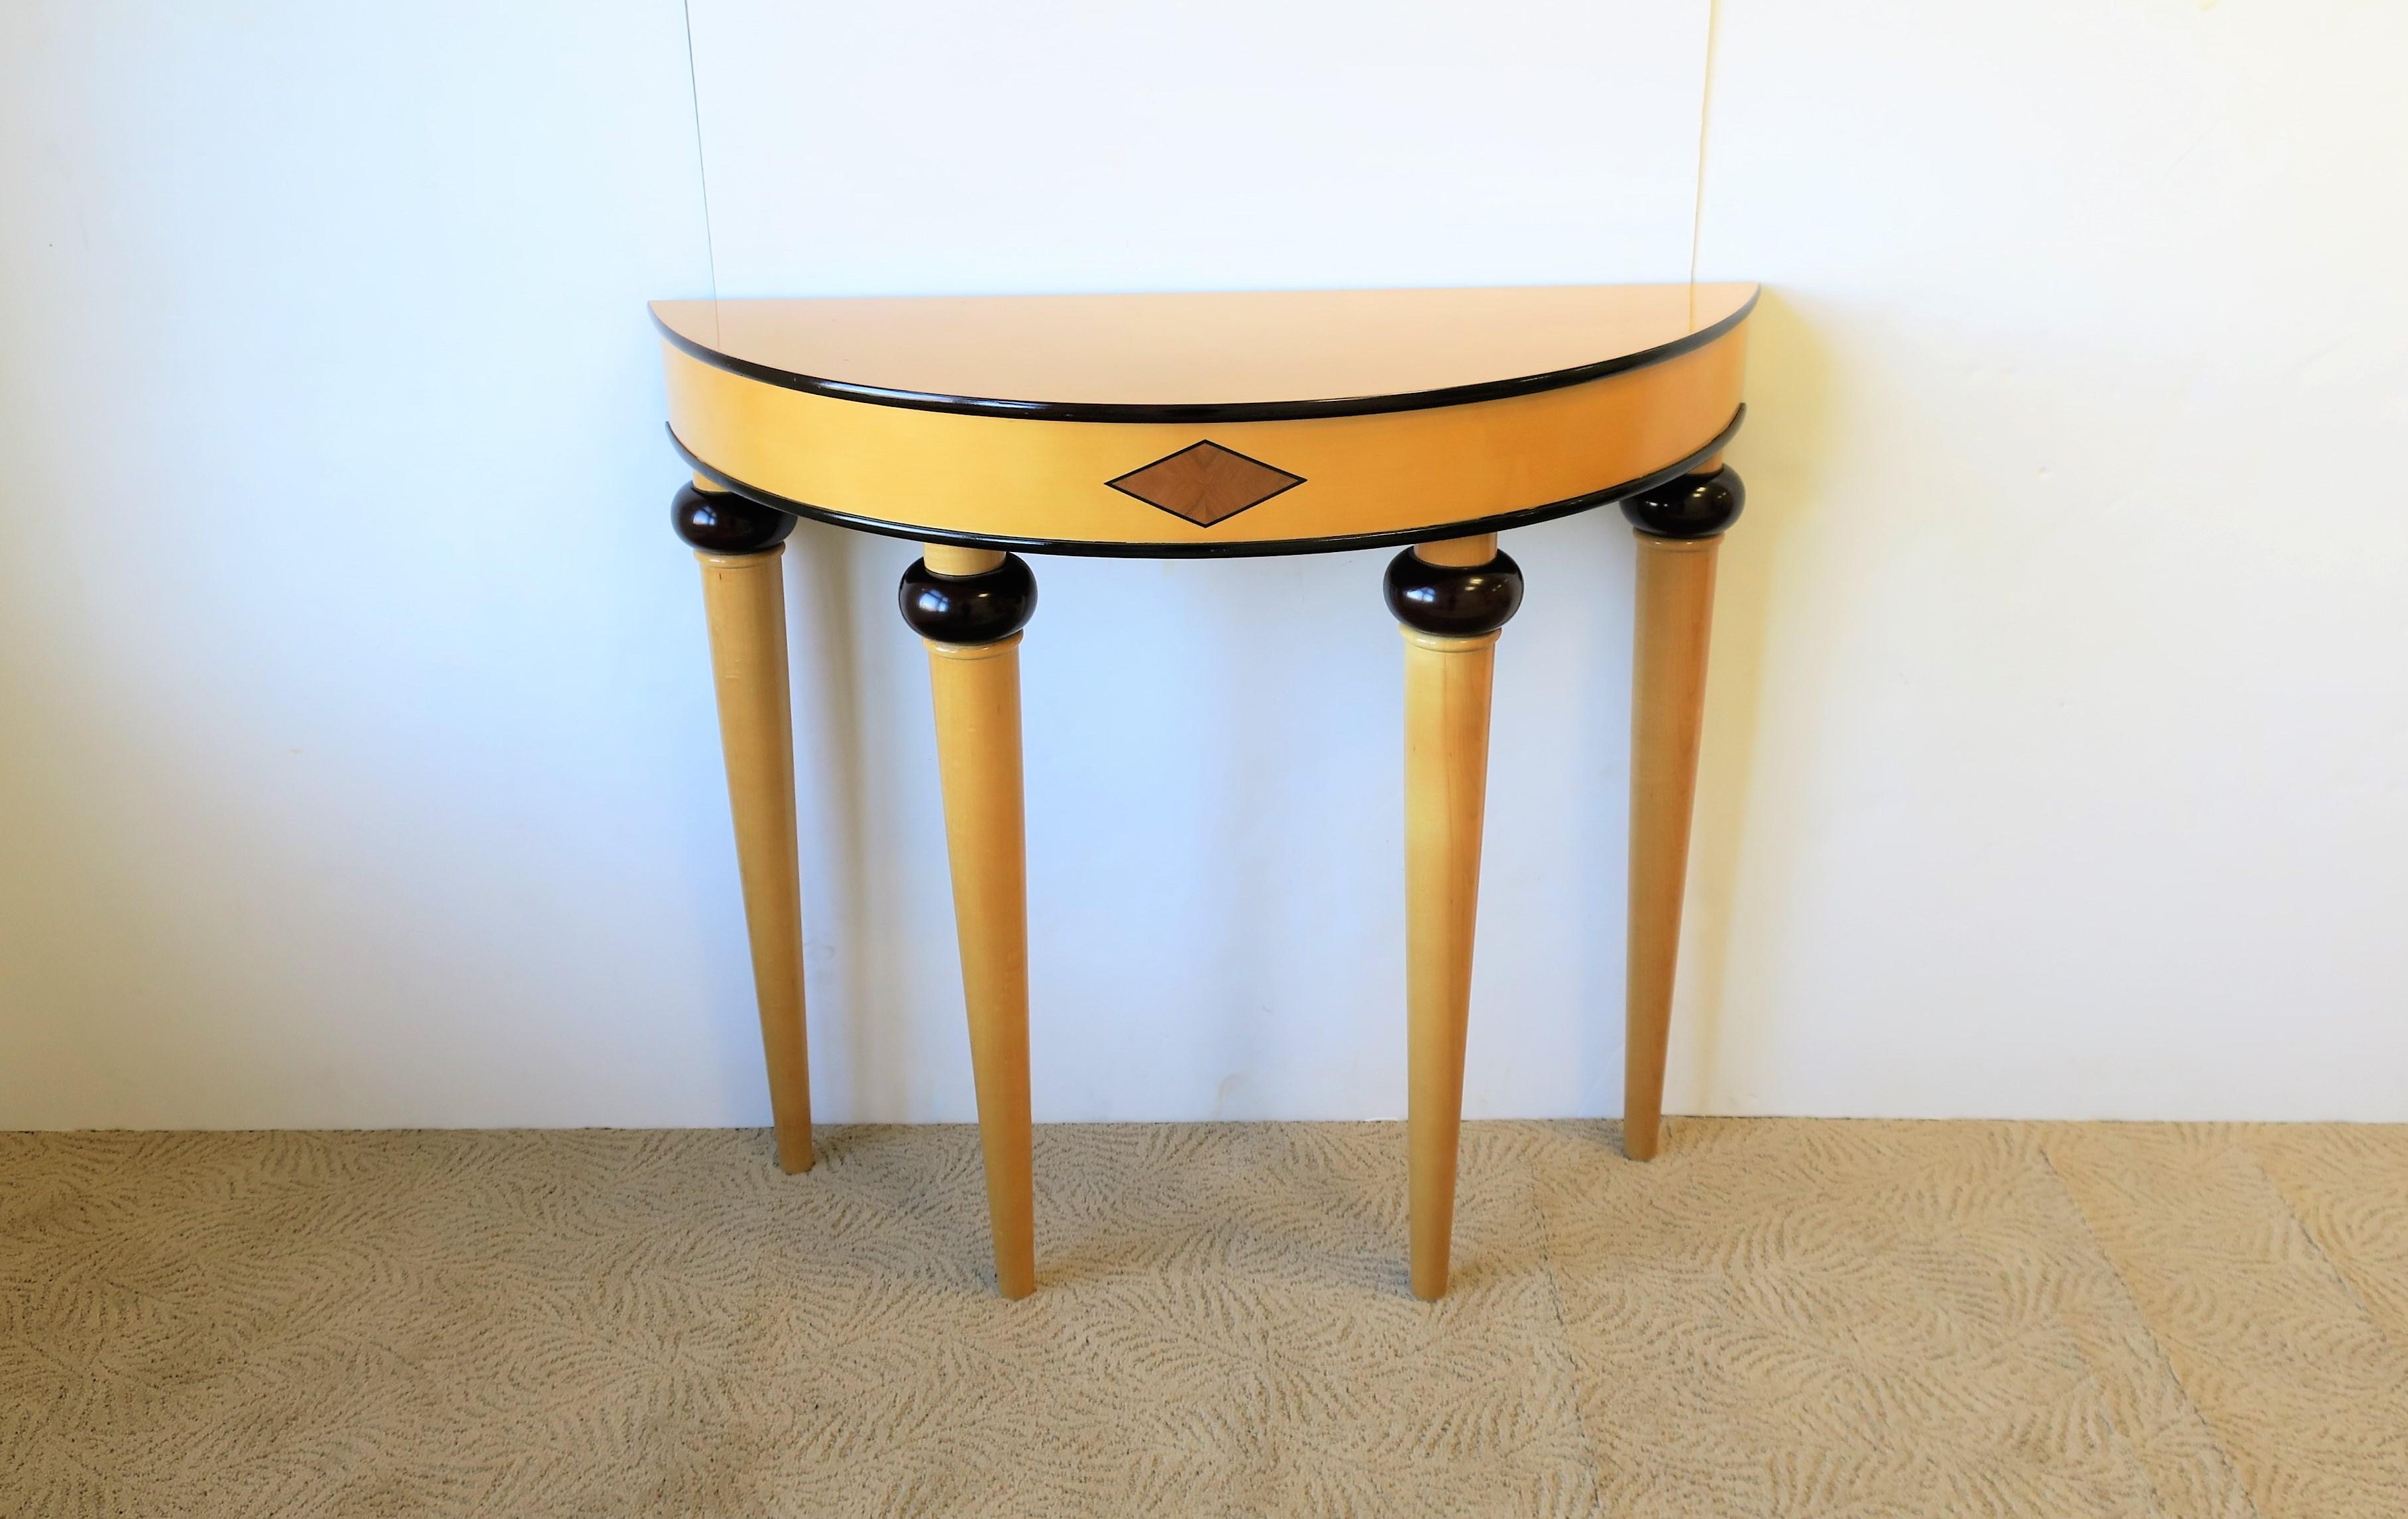 A striking late 20th century Art Deco style Demilune or 'halfmoon' wood console table, 1995. Console is blonde and ebony colored wood. Console may be convenient for a foyer or hall area. Measurements include: 30